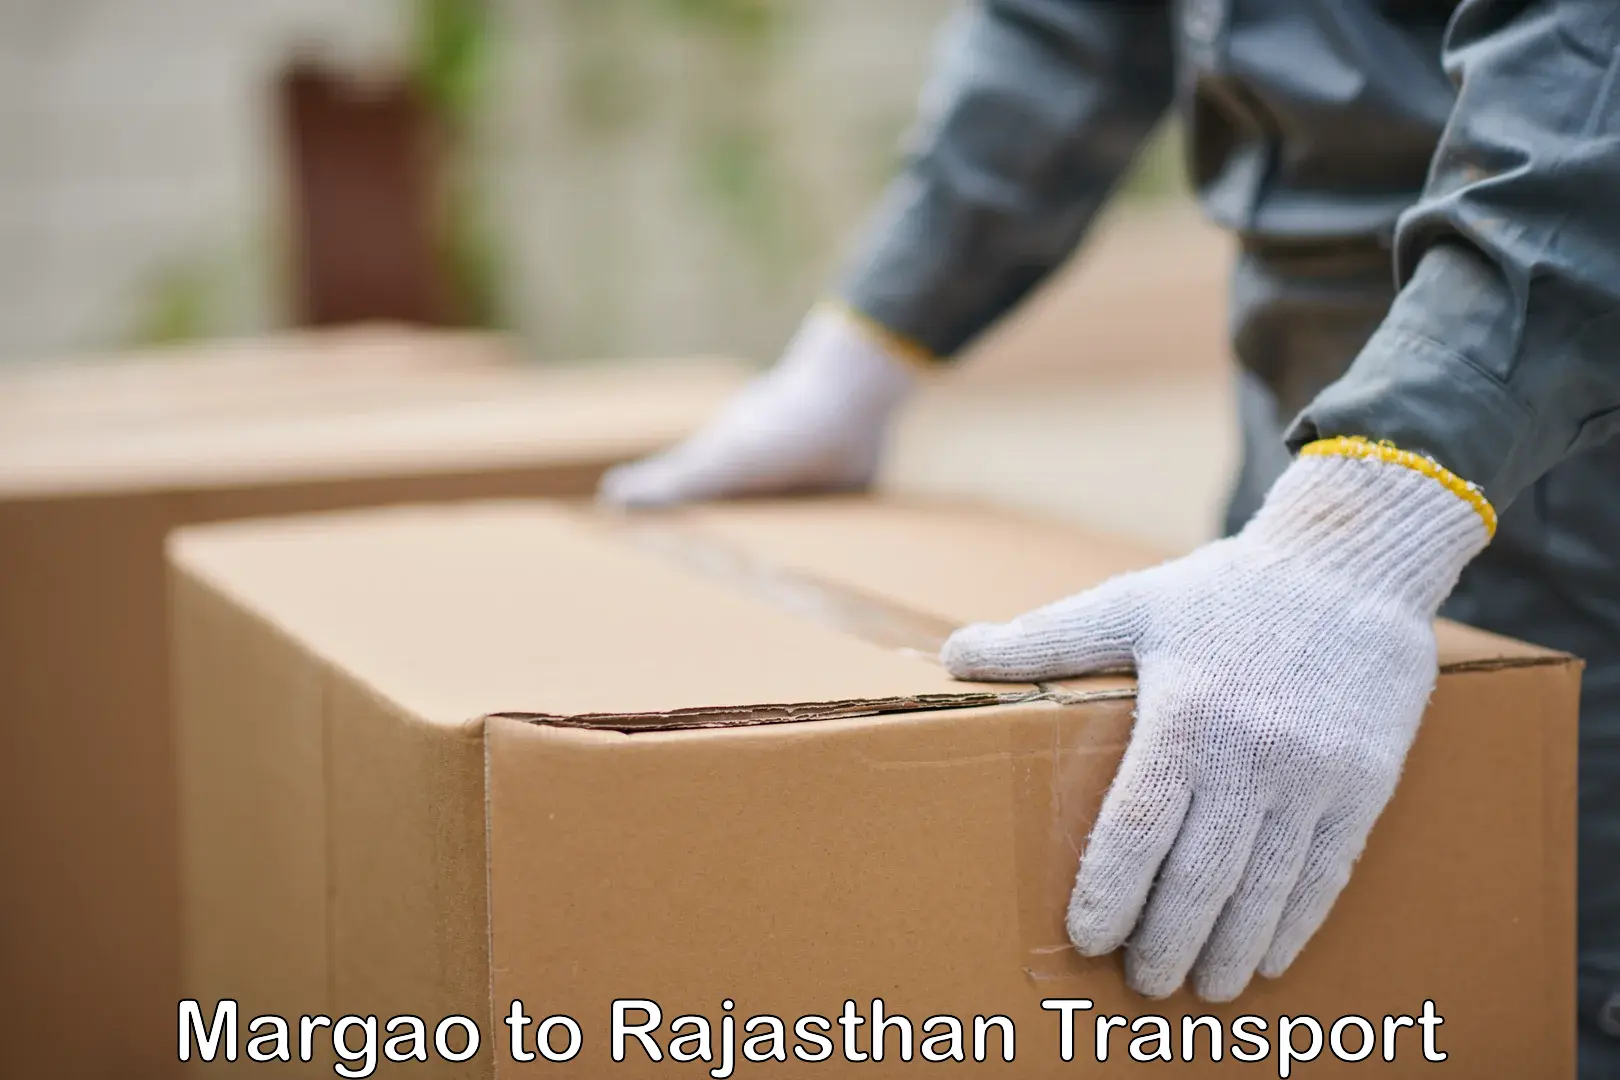 Commercial transport service Margao to Rajasthan